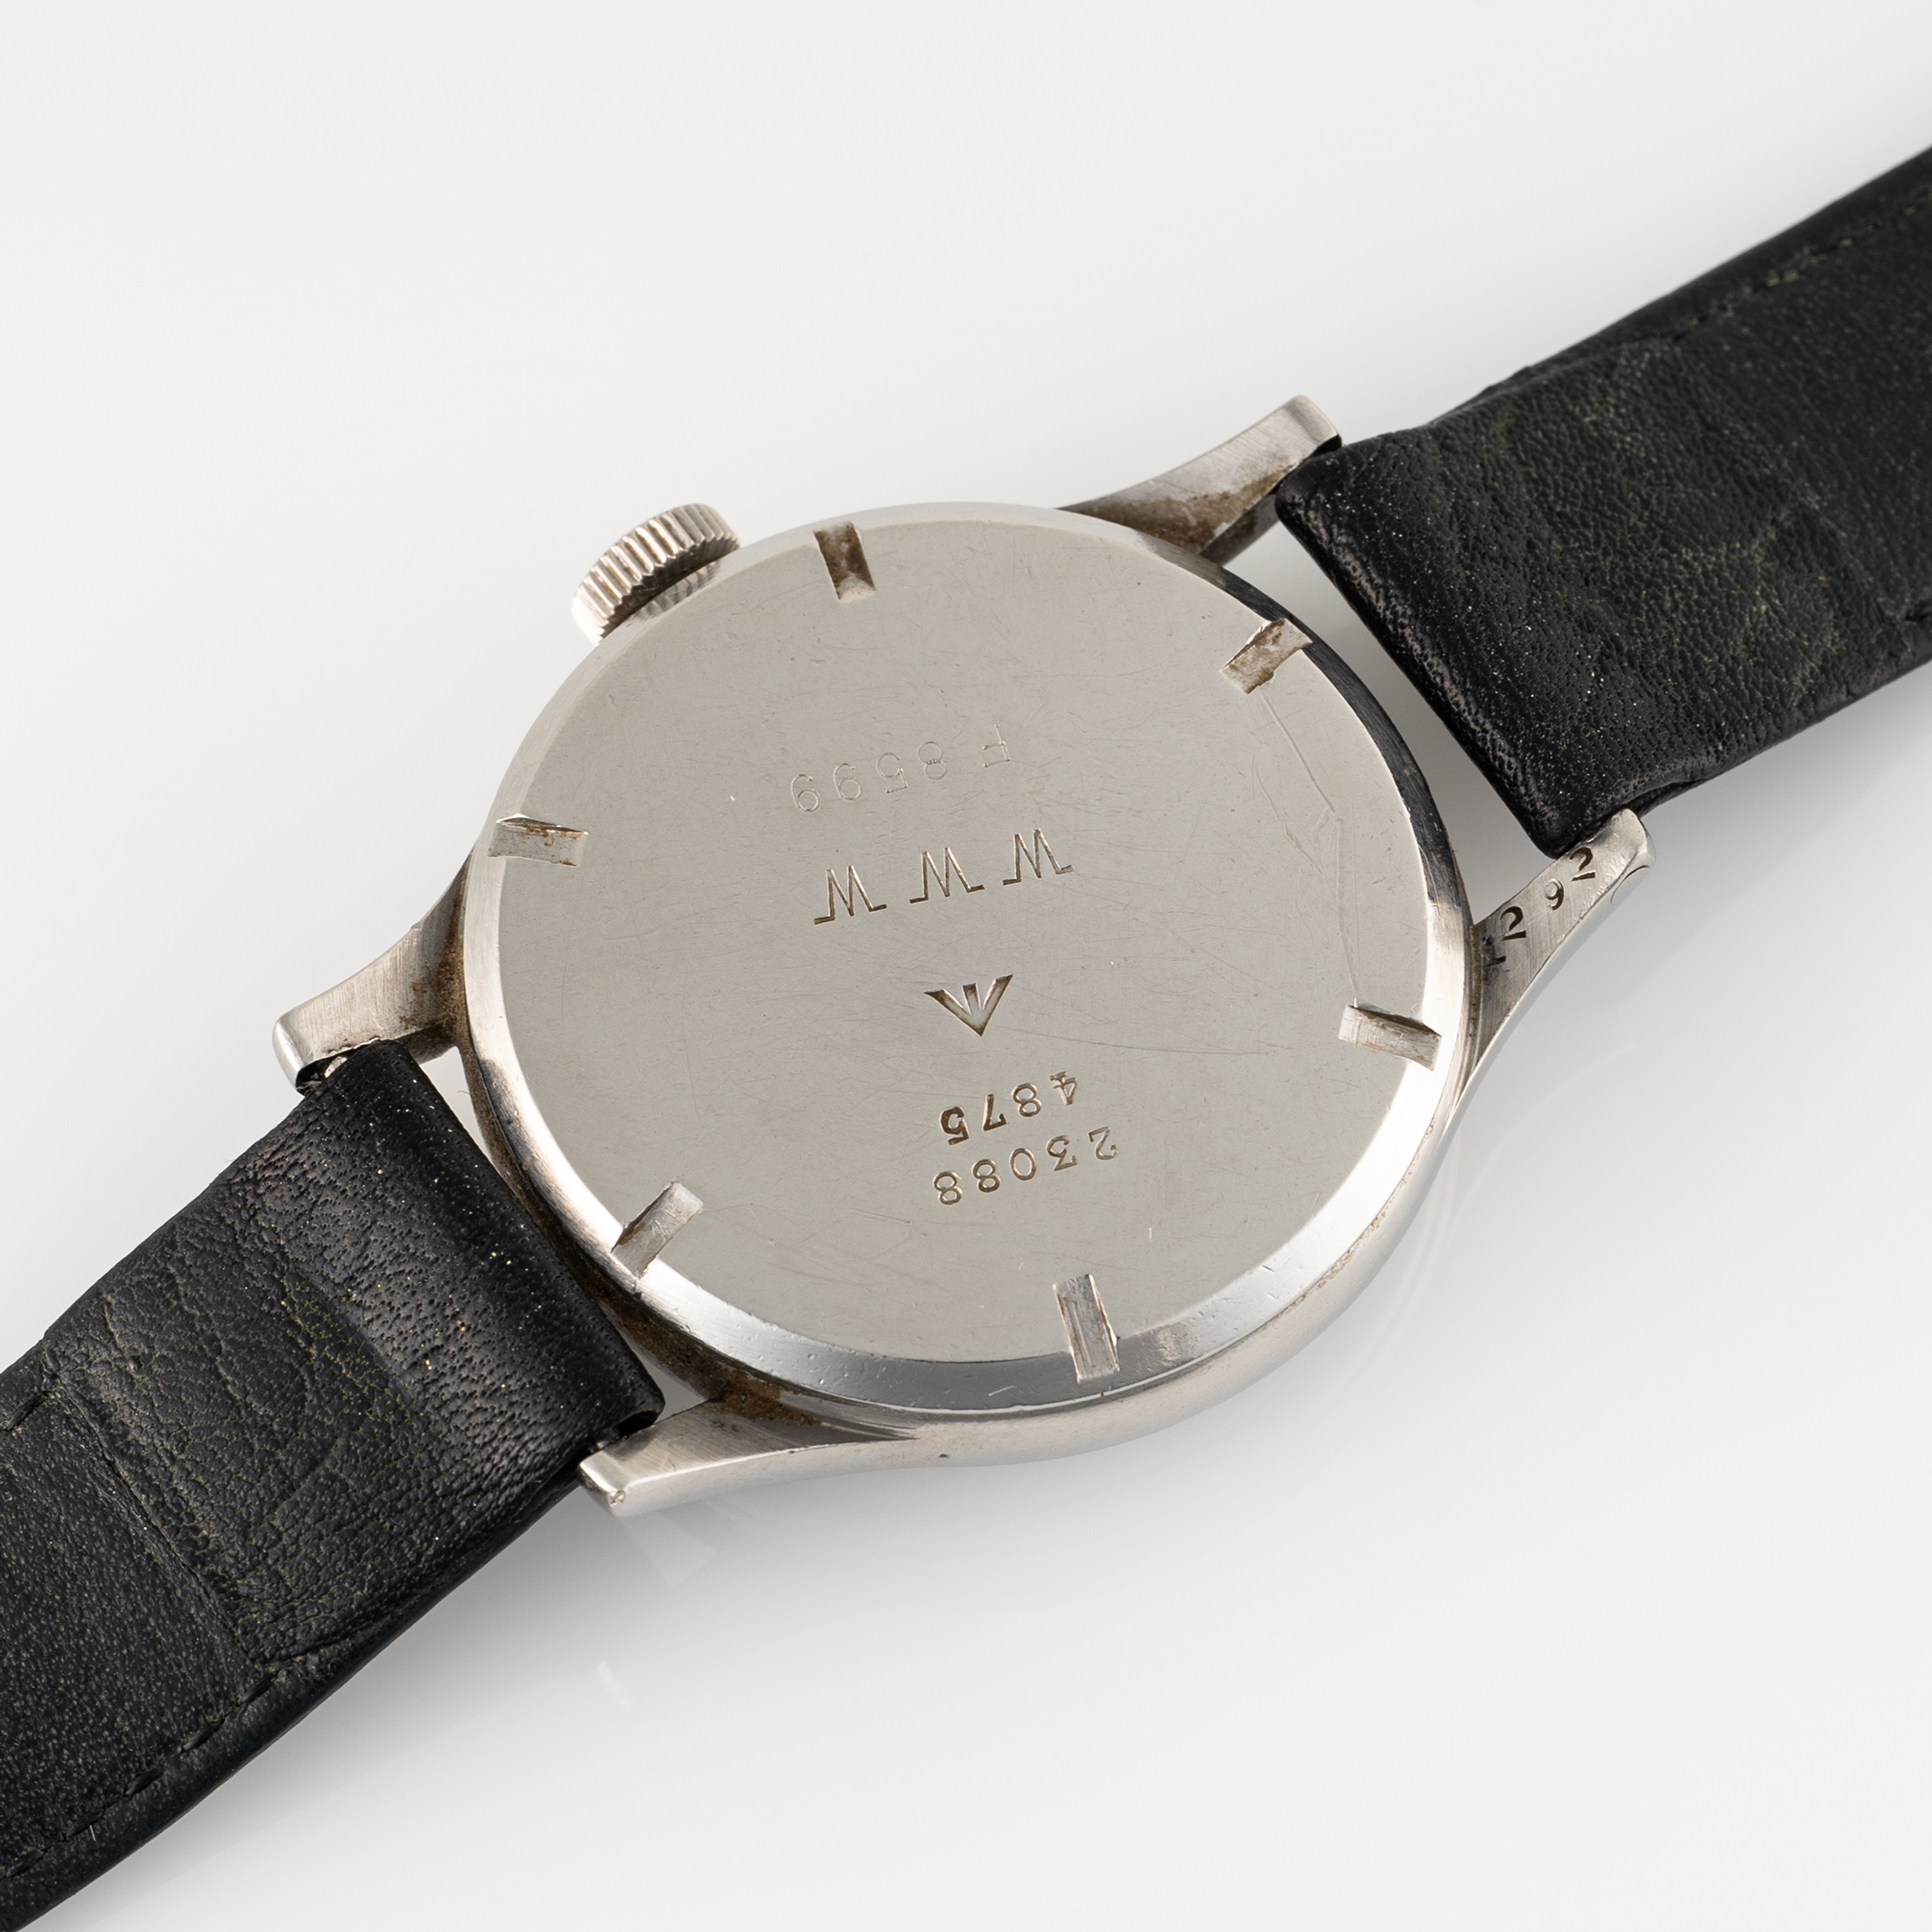 A GENTLEMAN'S STAINLESS STEEL BRITISH MILITARY LONGINES W.W.W. WRIST WATCH CIRCA 1945, PART OF - Image 7 of 8